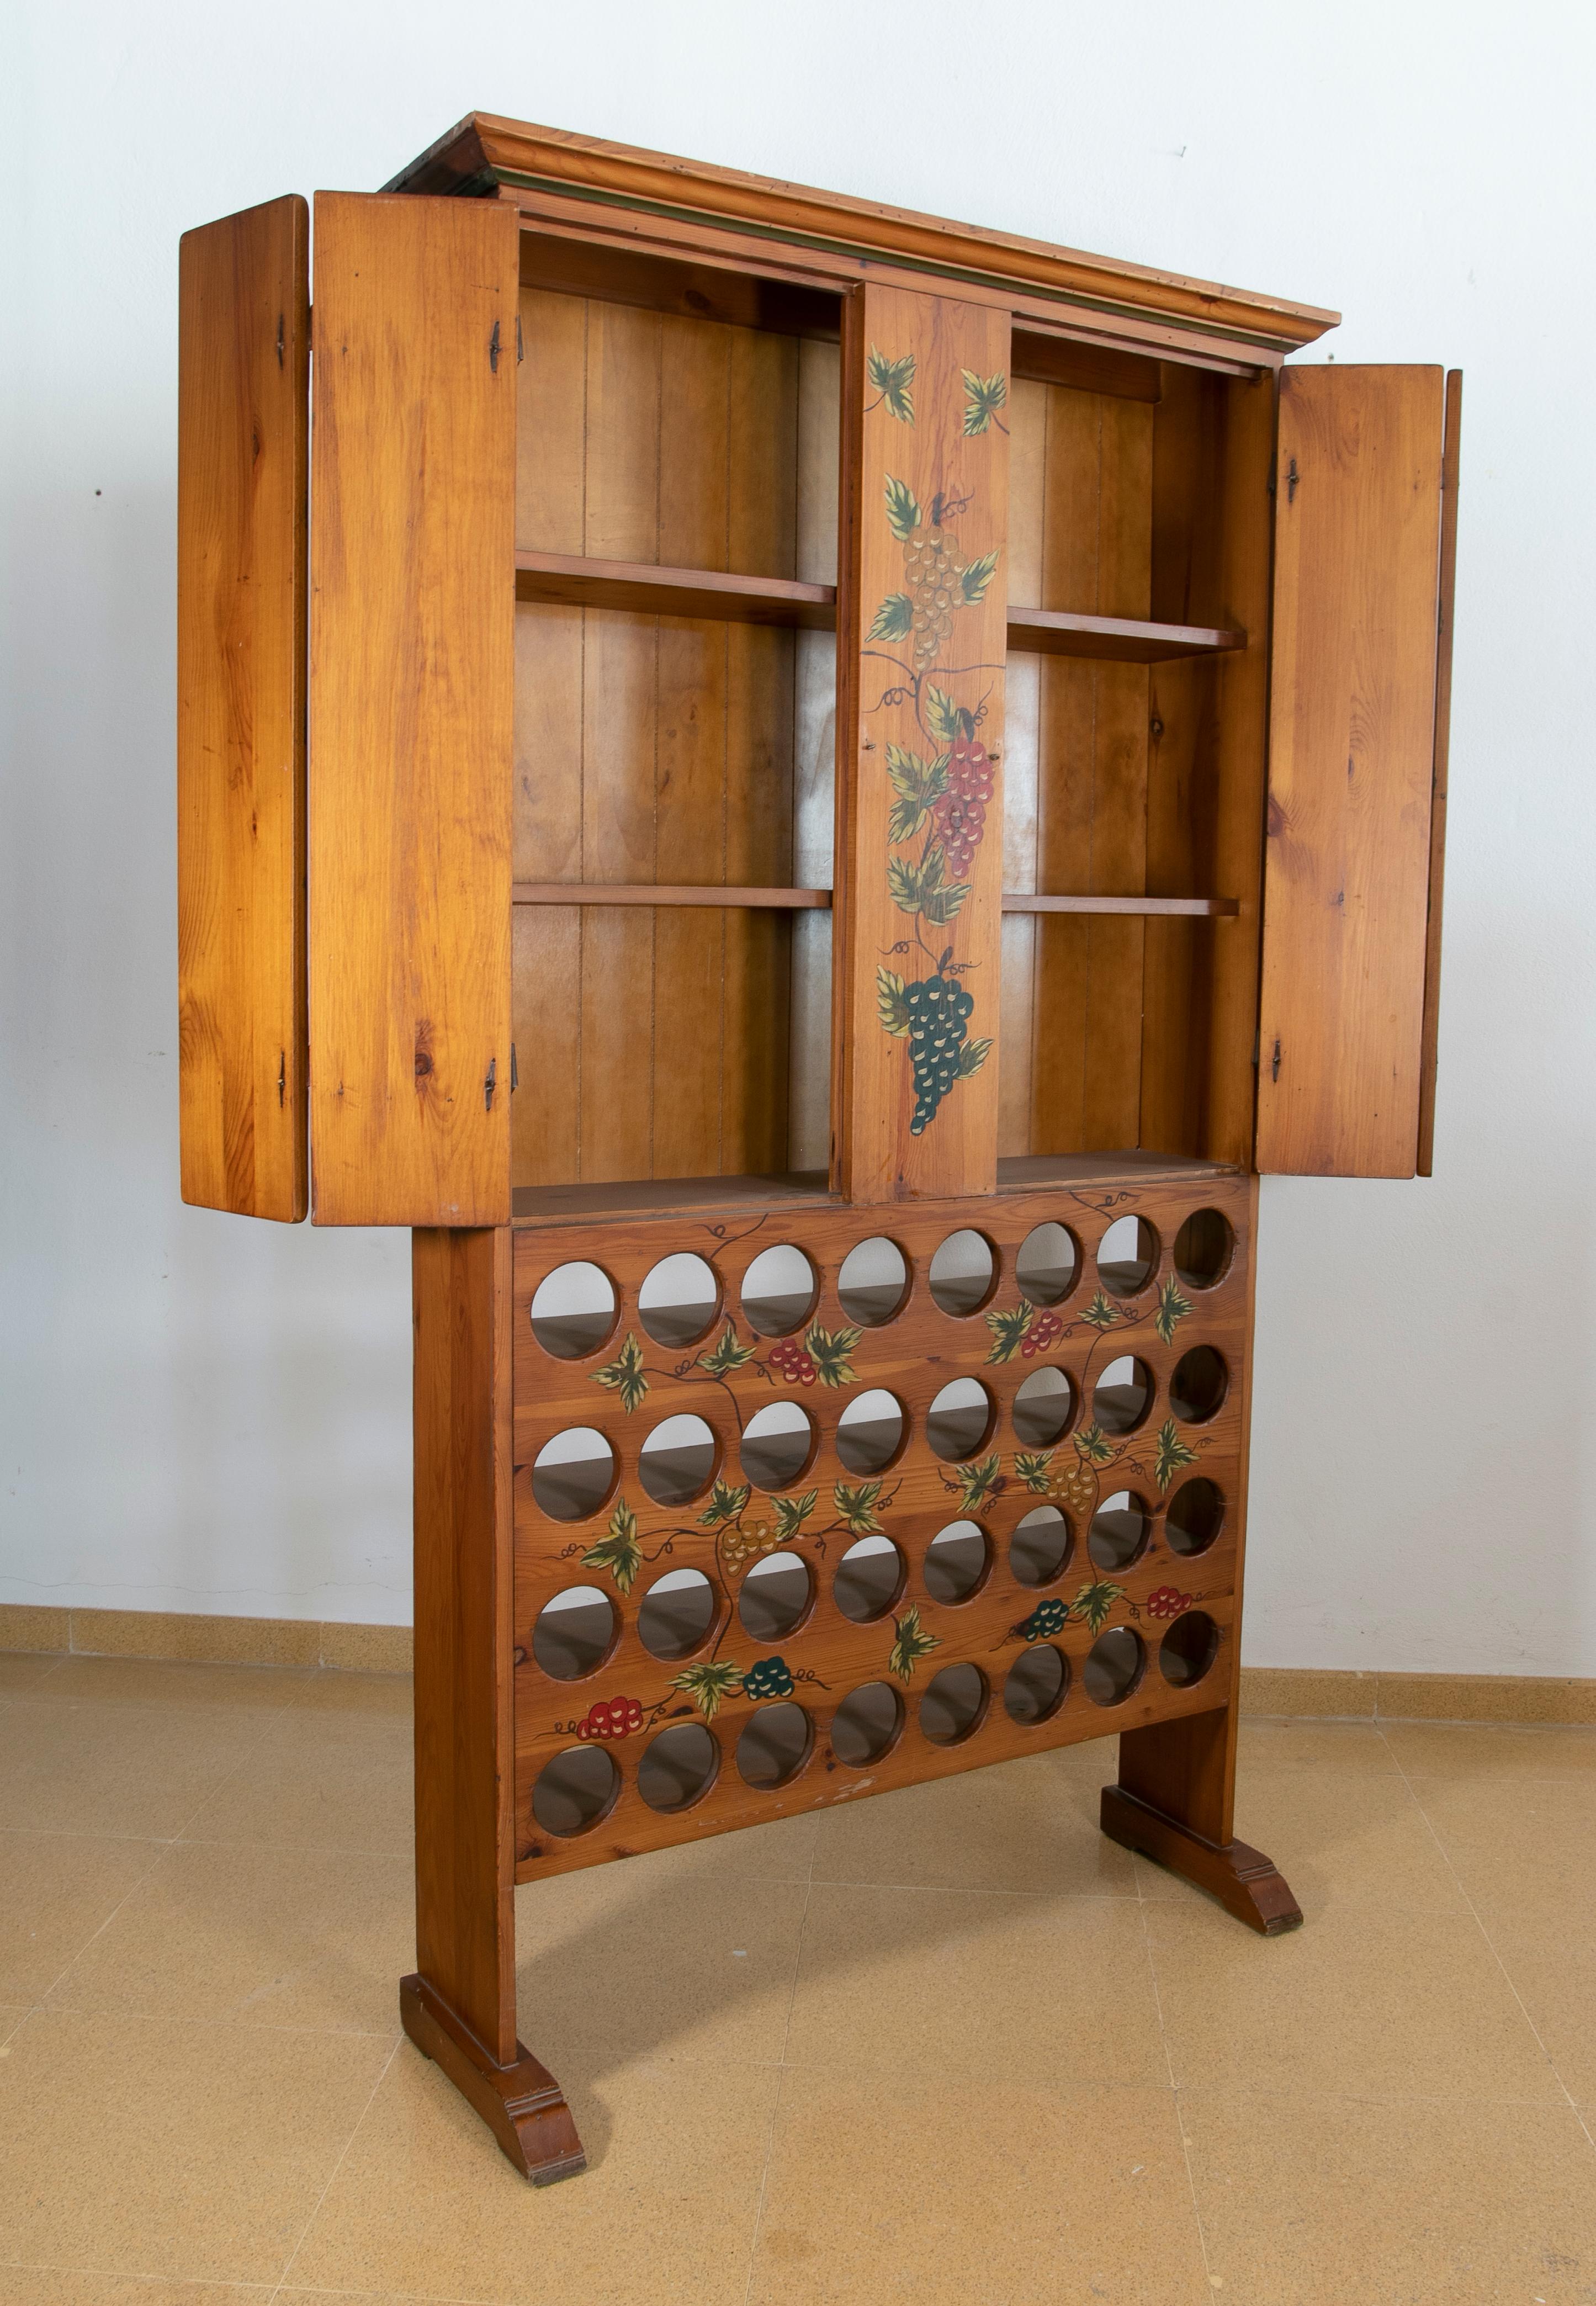 Spanish hand painted wooden wine bottle cabinet and doors.